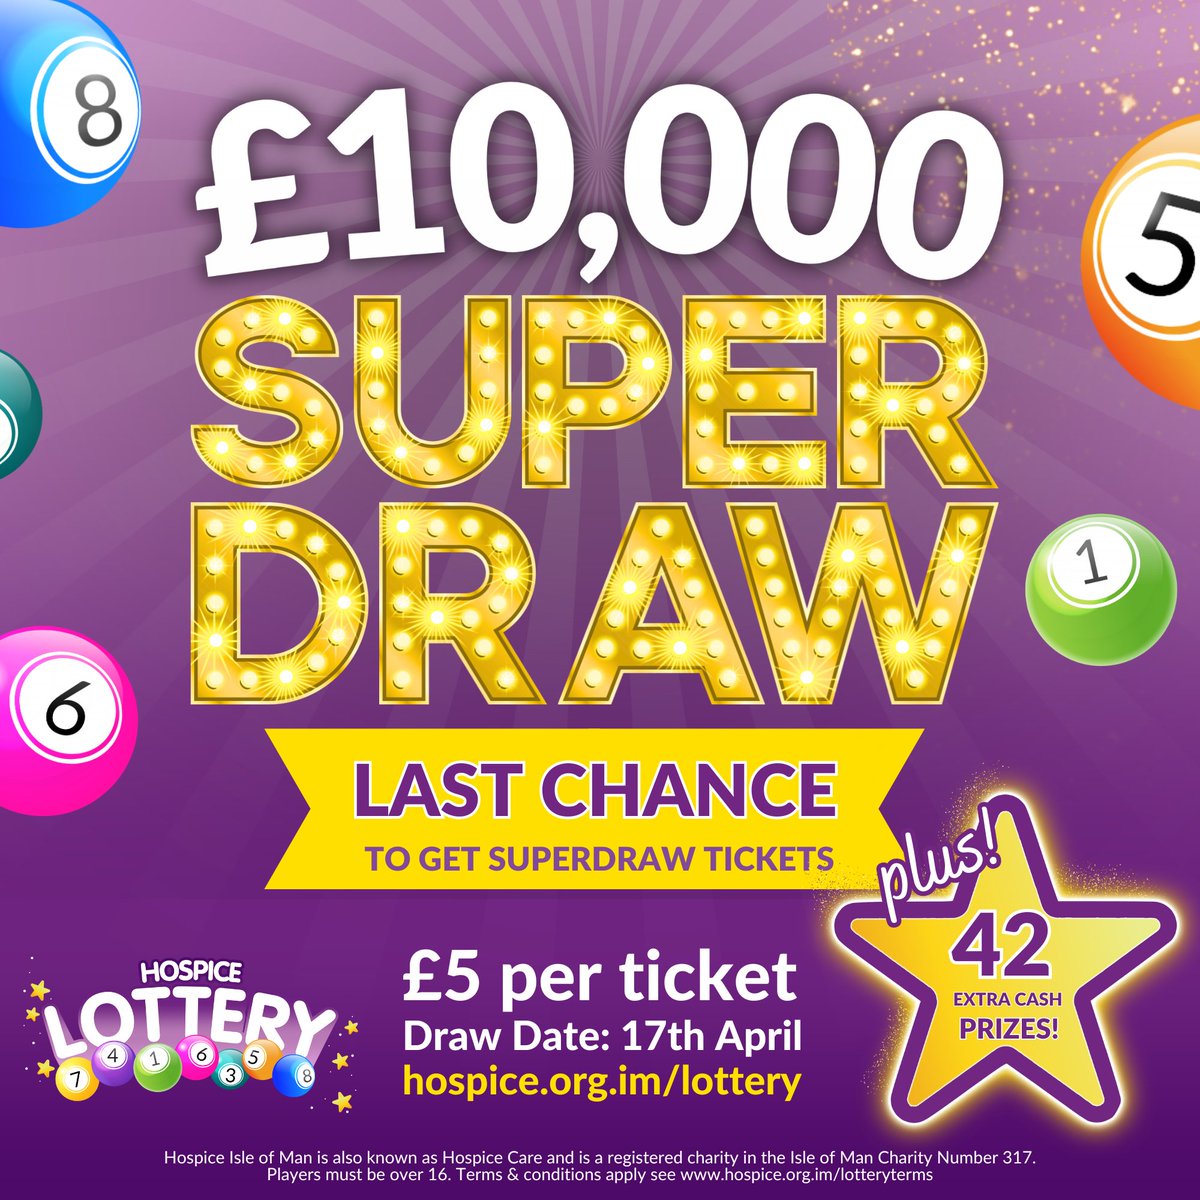 Our BIGGEST EVER Jackpot MUST BE WON this Wednesday 🌟 Our 17th April Lottery Draw will be a special SUPER DRAW offering our top winner a GUARANTEED prize jackpot of £10,000!! Tickets cost only £5 each! Get your tickets here 👉 HOSPICE.ORG.IM/LOTTERY